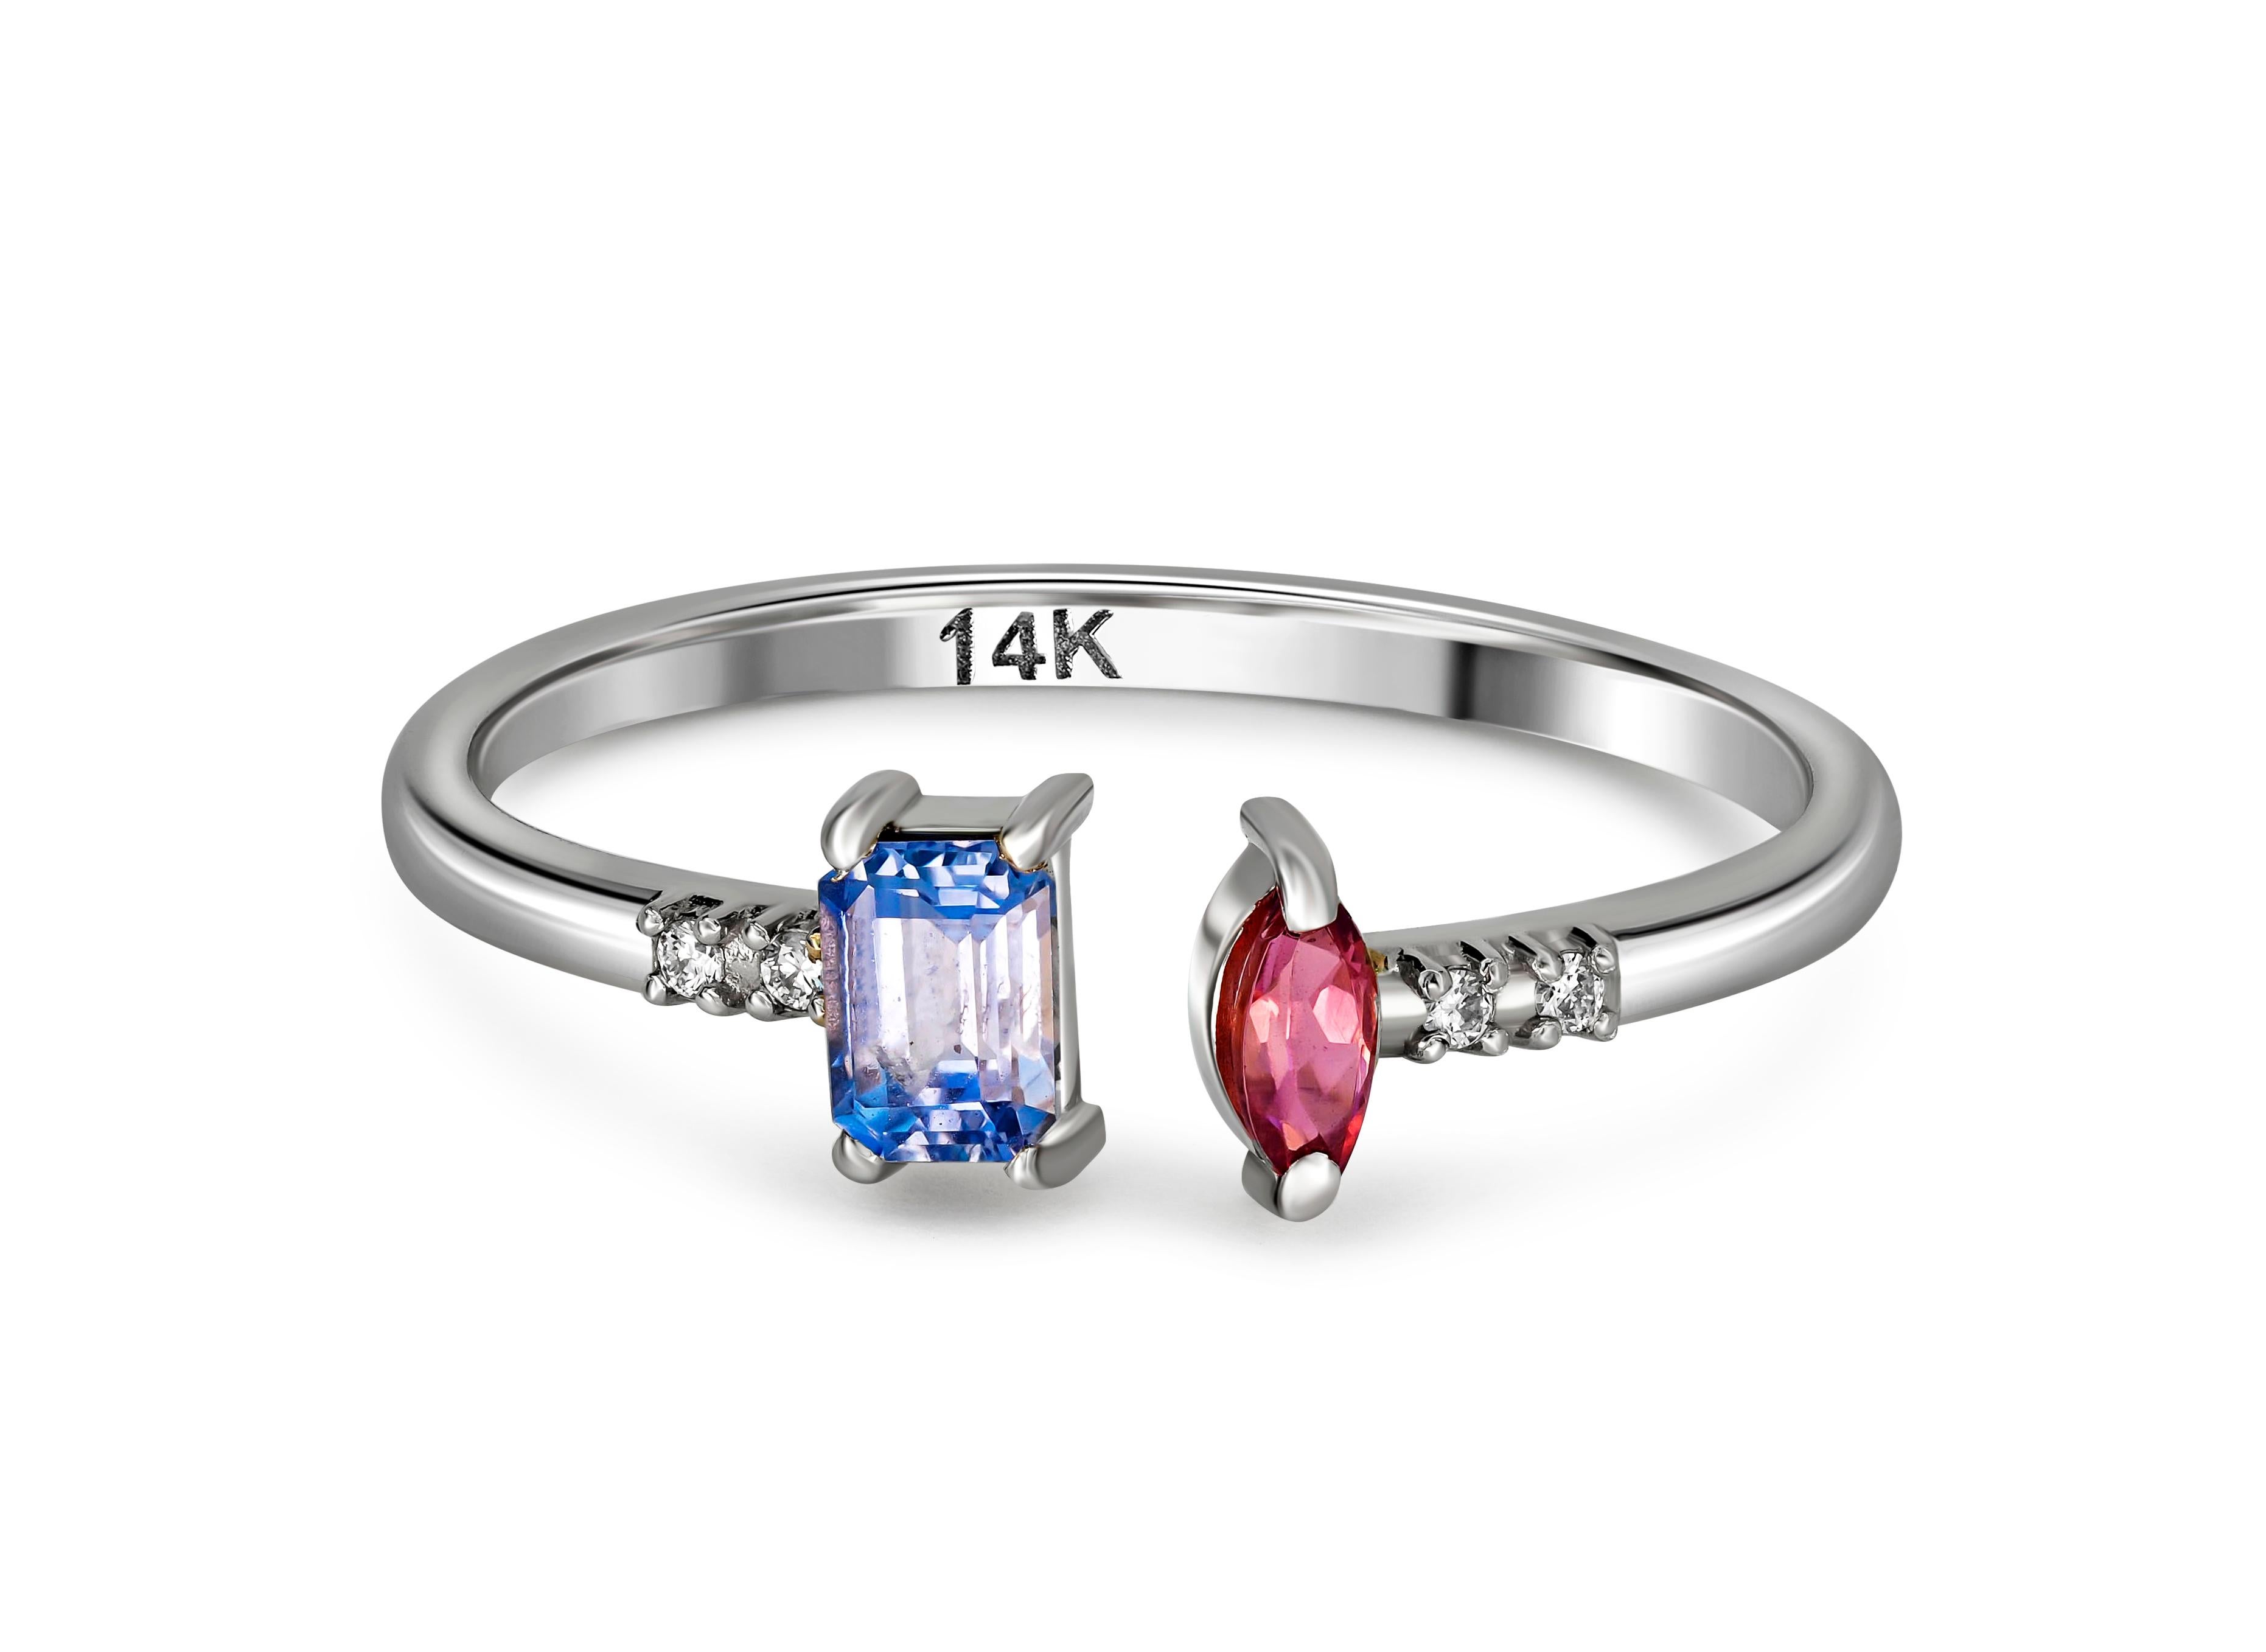 Real sapphire 14k gold ring. 
Sapphire and ruby gold ring. Sapphire baguette ring. Open ended ring. Blue sapphire ring. Minimalist ring.

Weight: 1.55 g. depends from size.
Metall: 14k marked.

Sapphire:
Baguette shape, transparent, blue, 0.25